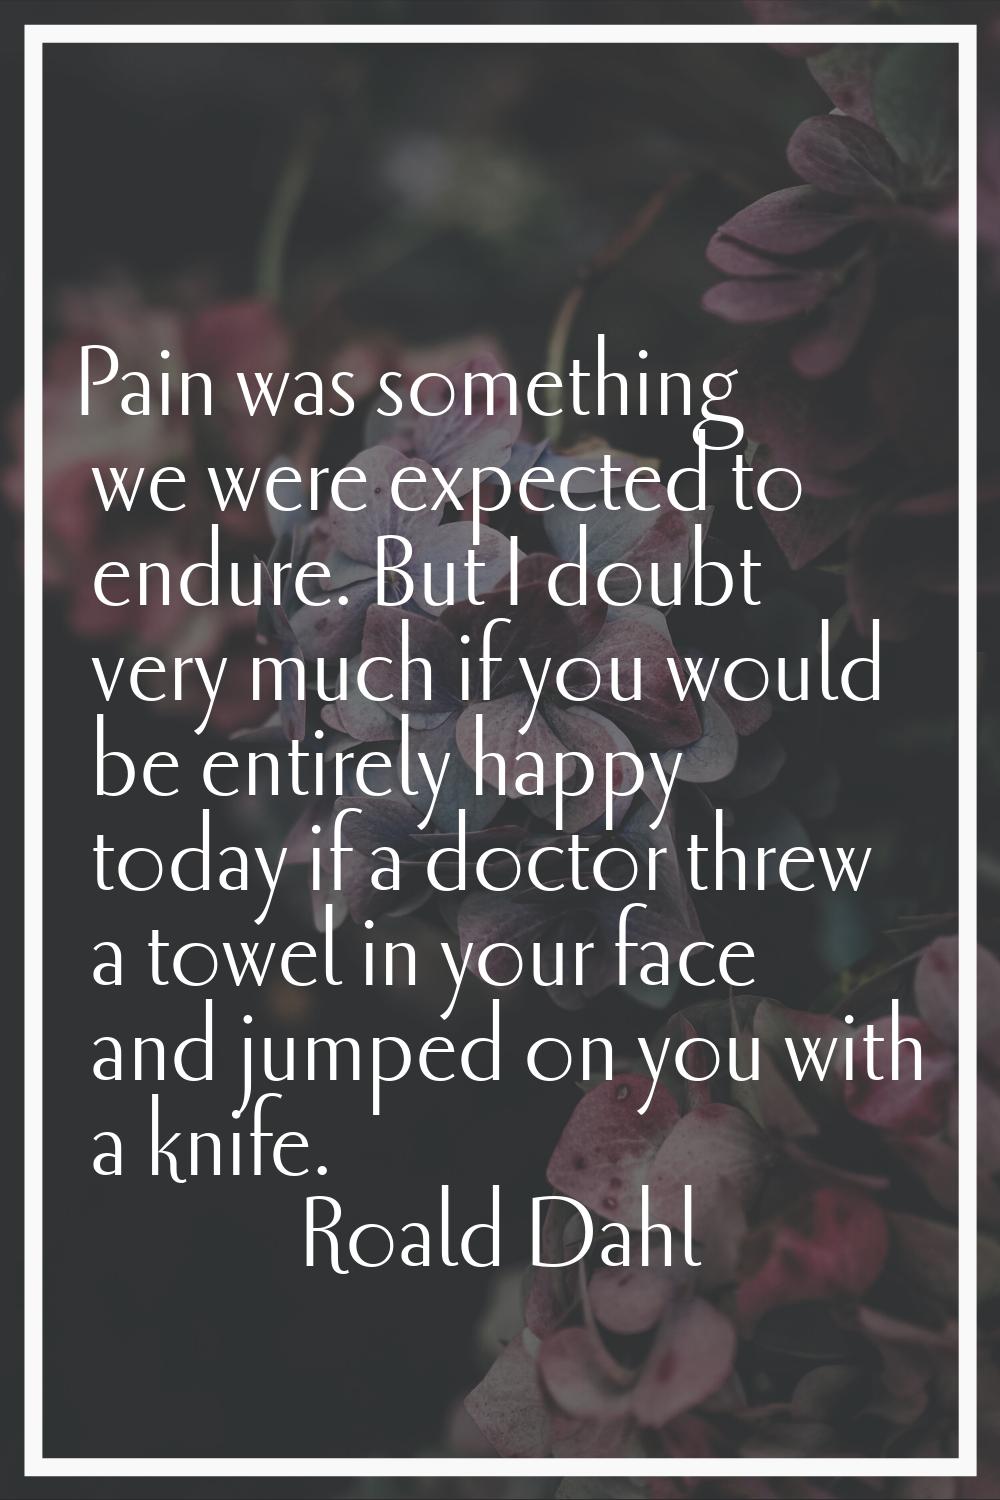 Pain was something we were expected to endure. But I doubt very much if you would be entirely happy